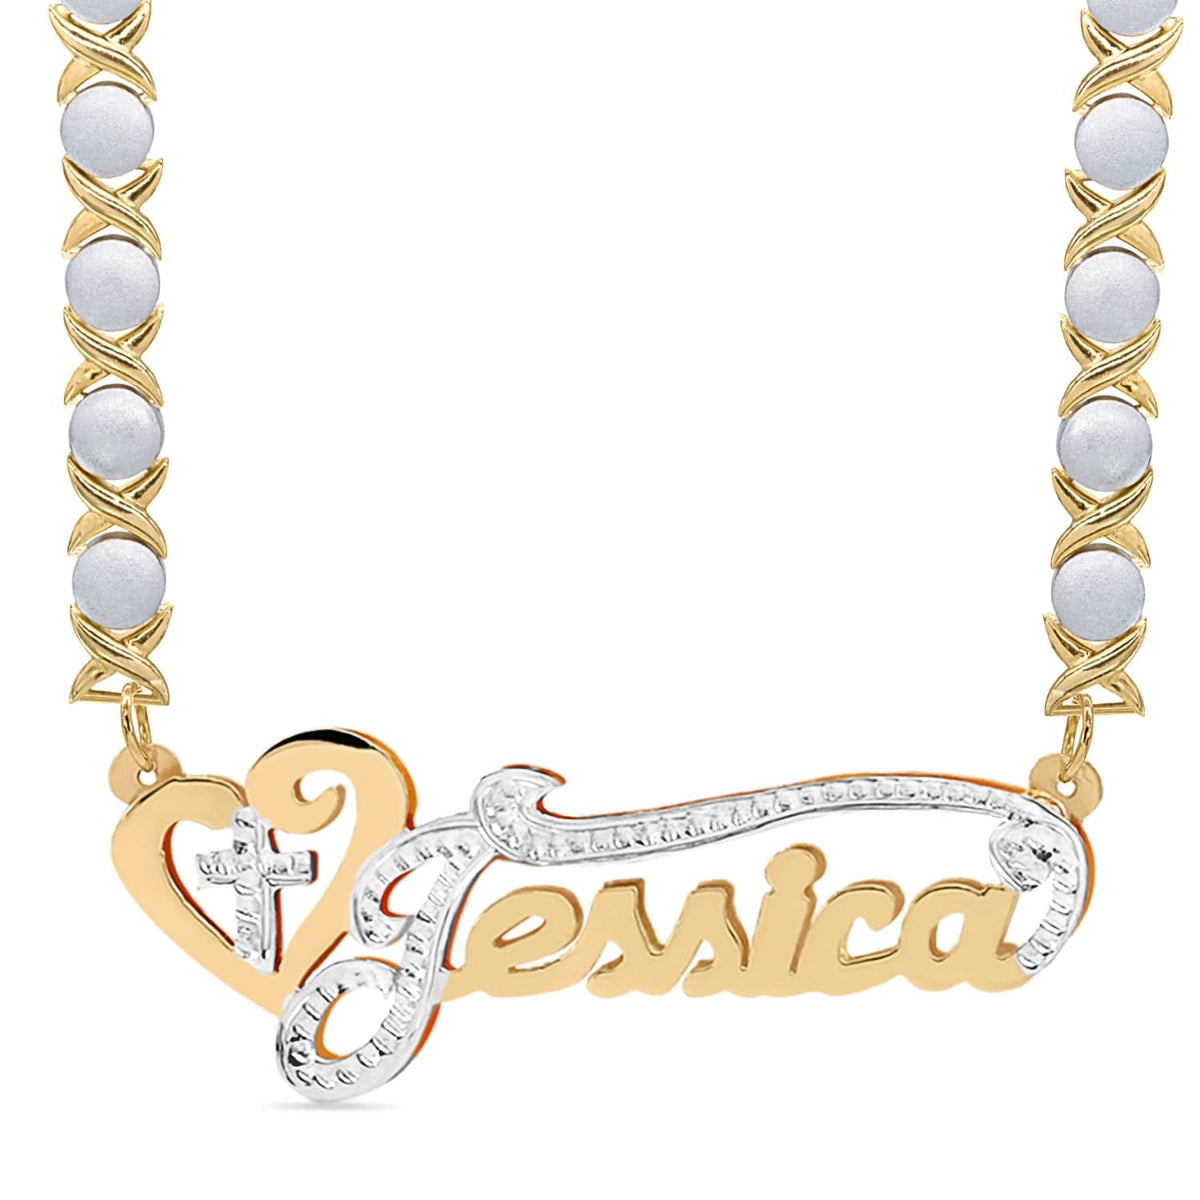 14k Gold over Sterling Silver / Rhodium Xoxo Chain Double Plated Nameplate Necklace &quot;Jessica&quot; with Rhodium Xoxo chain